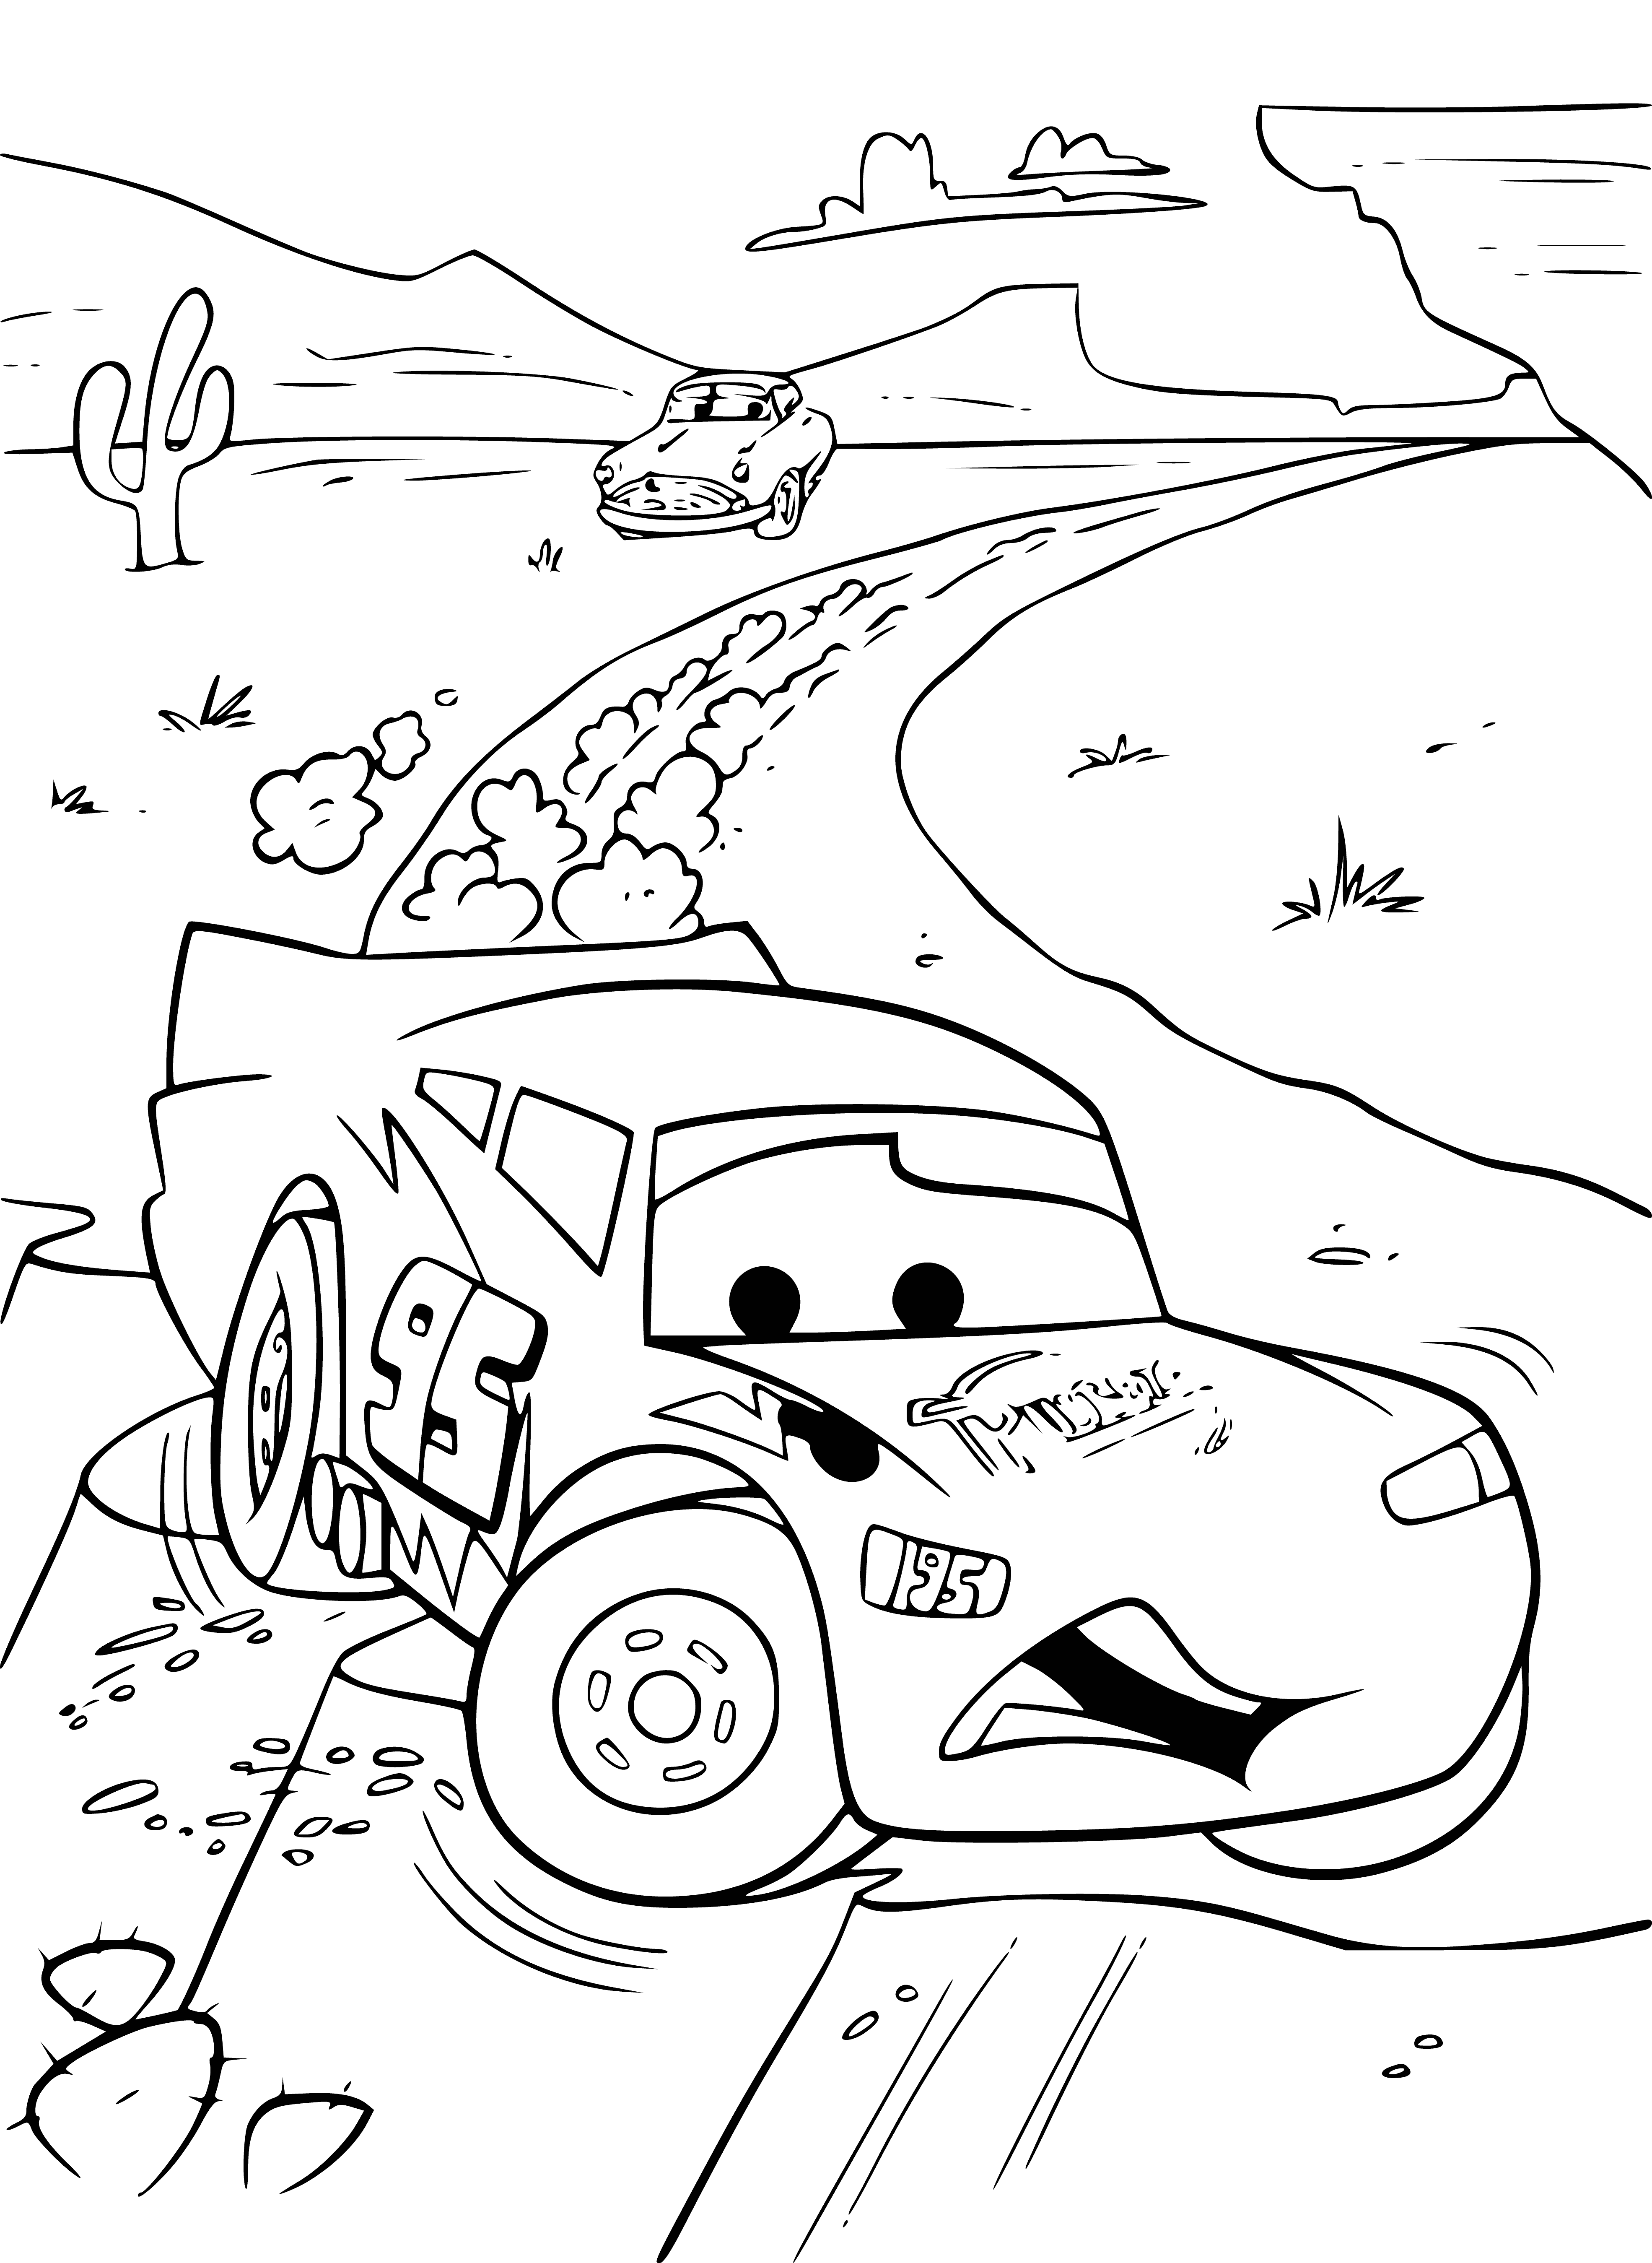 coloring page: 3 cars in a line: blue, red, yellow. Blue car in front, yellow car in back. #coloringpage